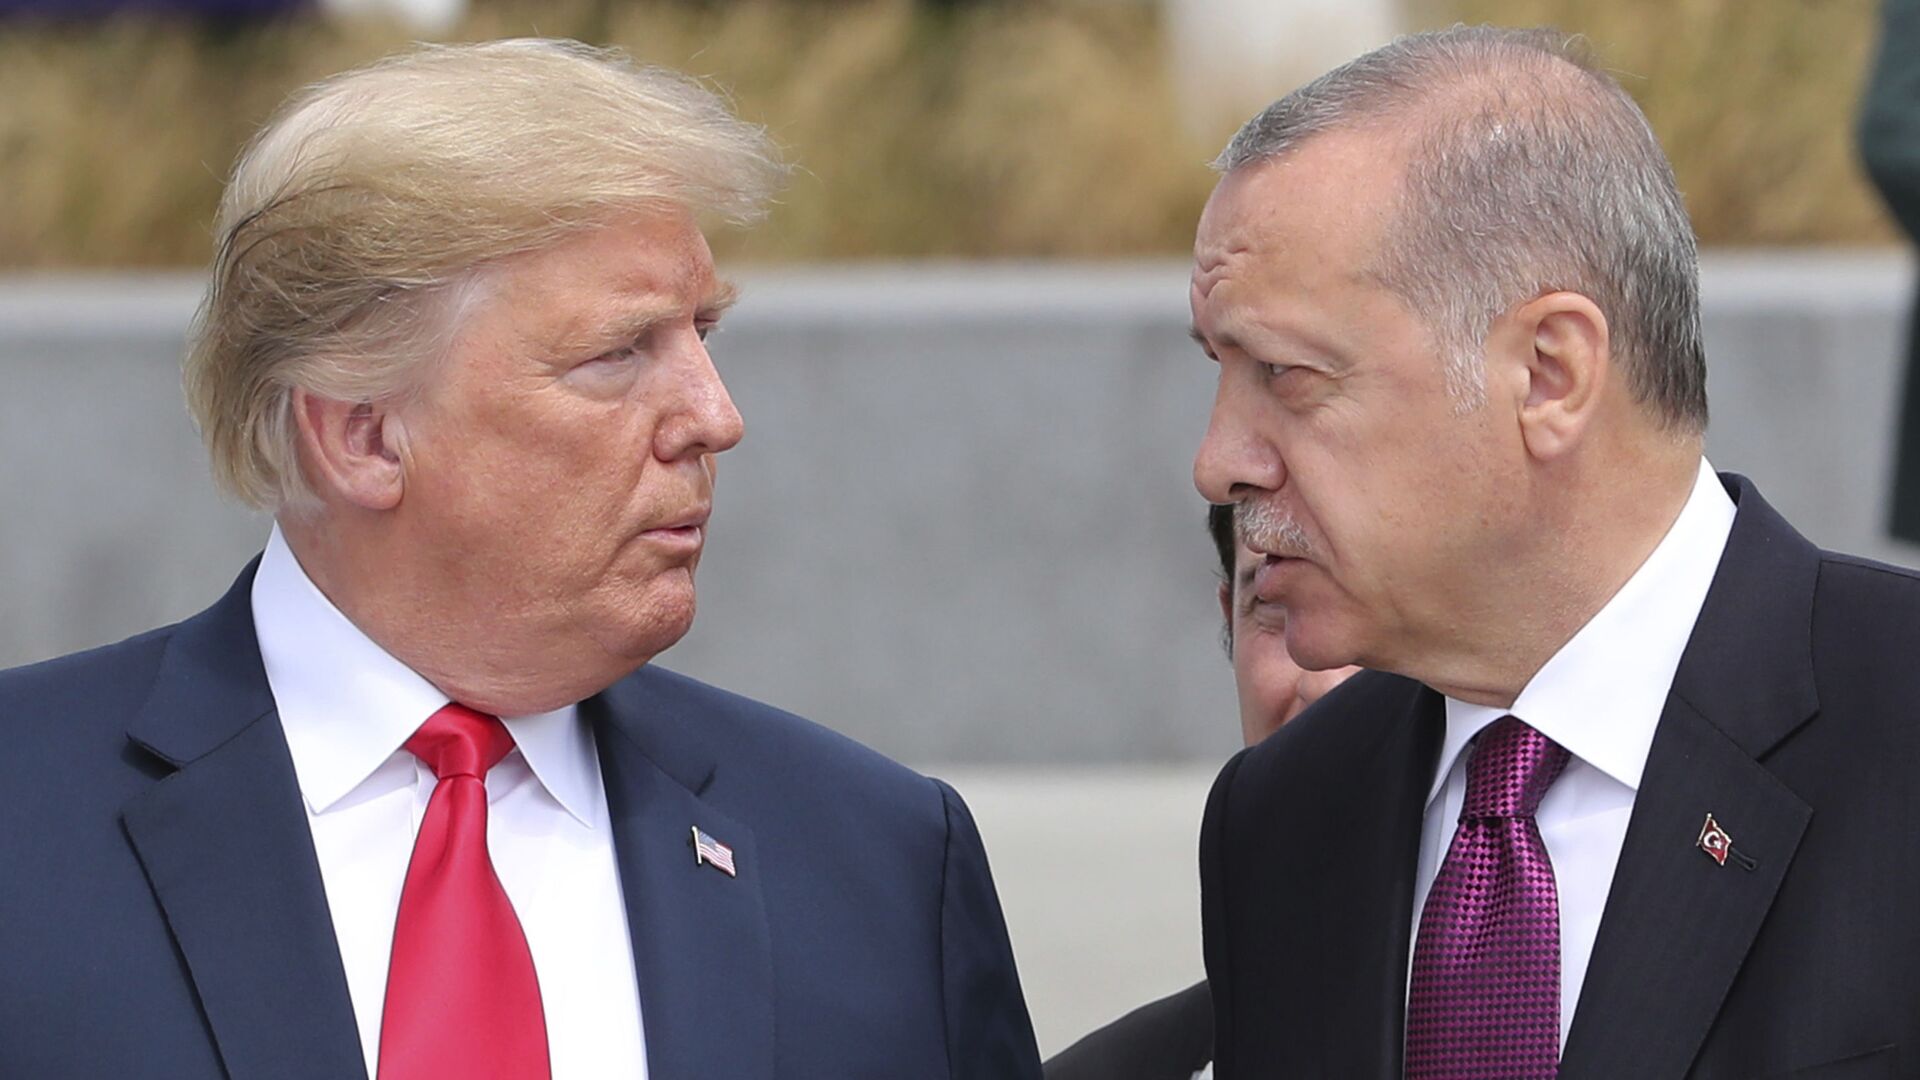 U.S. President Donald Trump, left, talks to Turkish President Recep Tayyip Erdogan, right, as they tour the new NATO headquarters in Brussels, Belgium, Wednesday, July 11, 2018. NATO countries' heads of states and governments gather in Brussels for a two-day meeting.  - Sputnik International, 1920, 05.10.2021